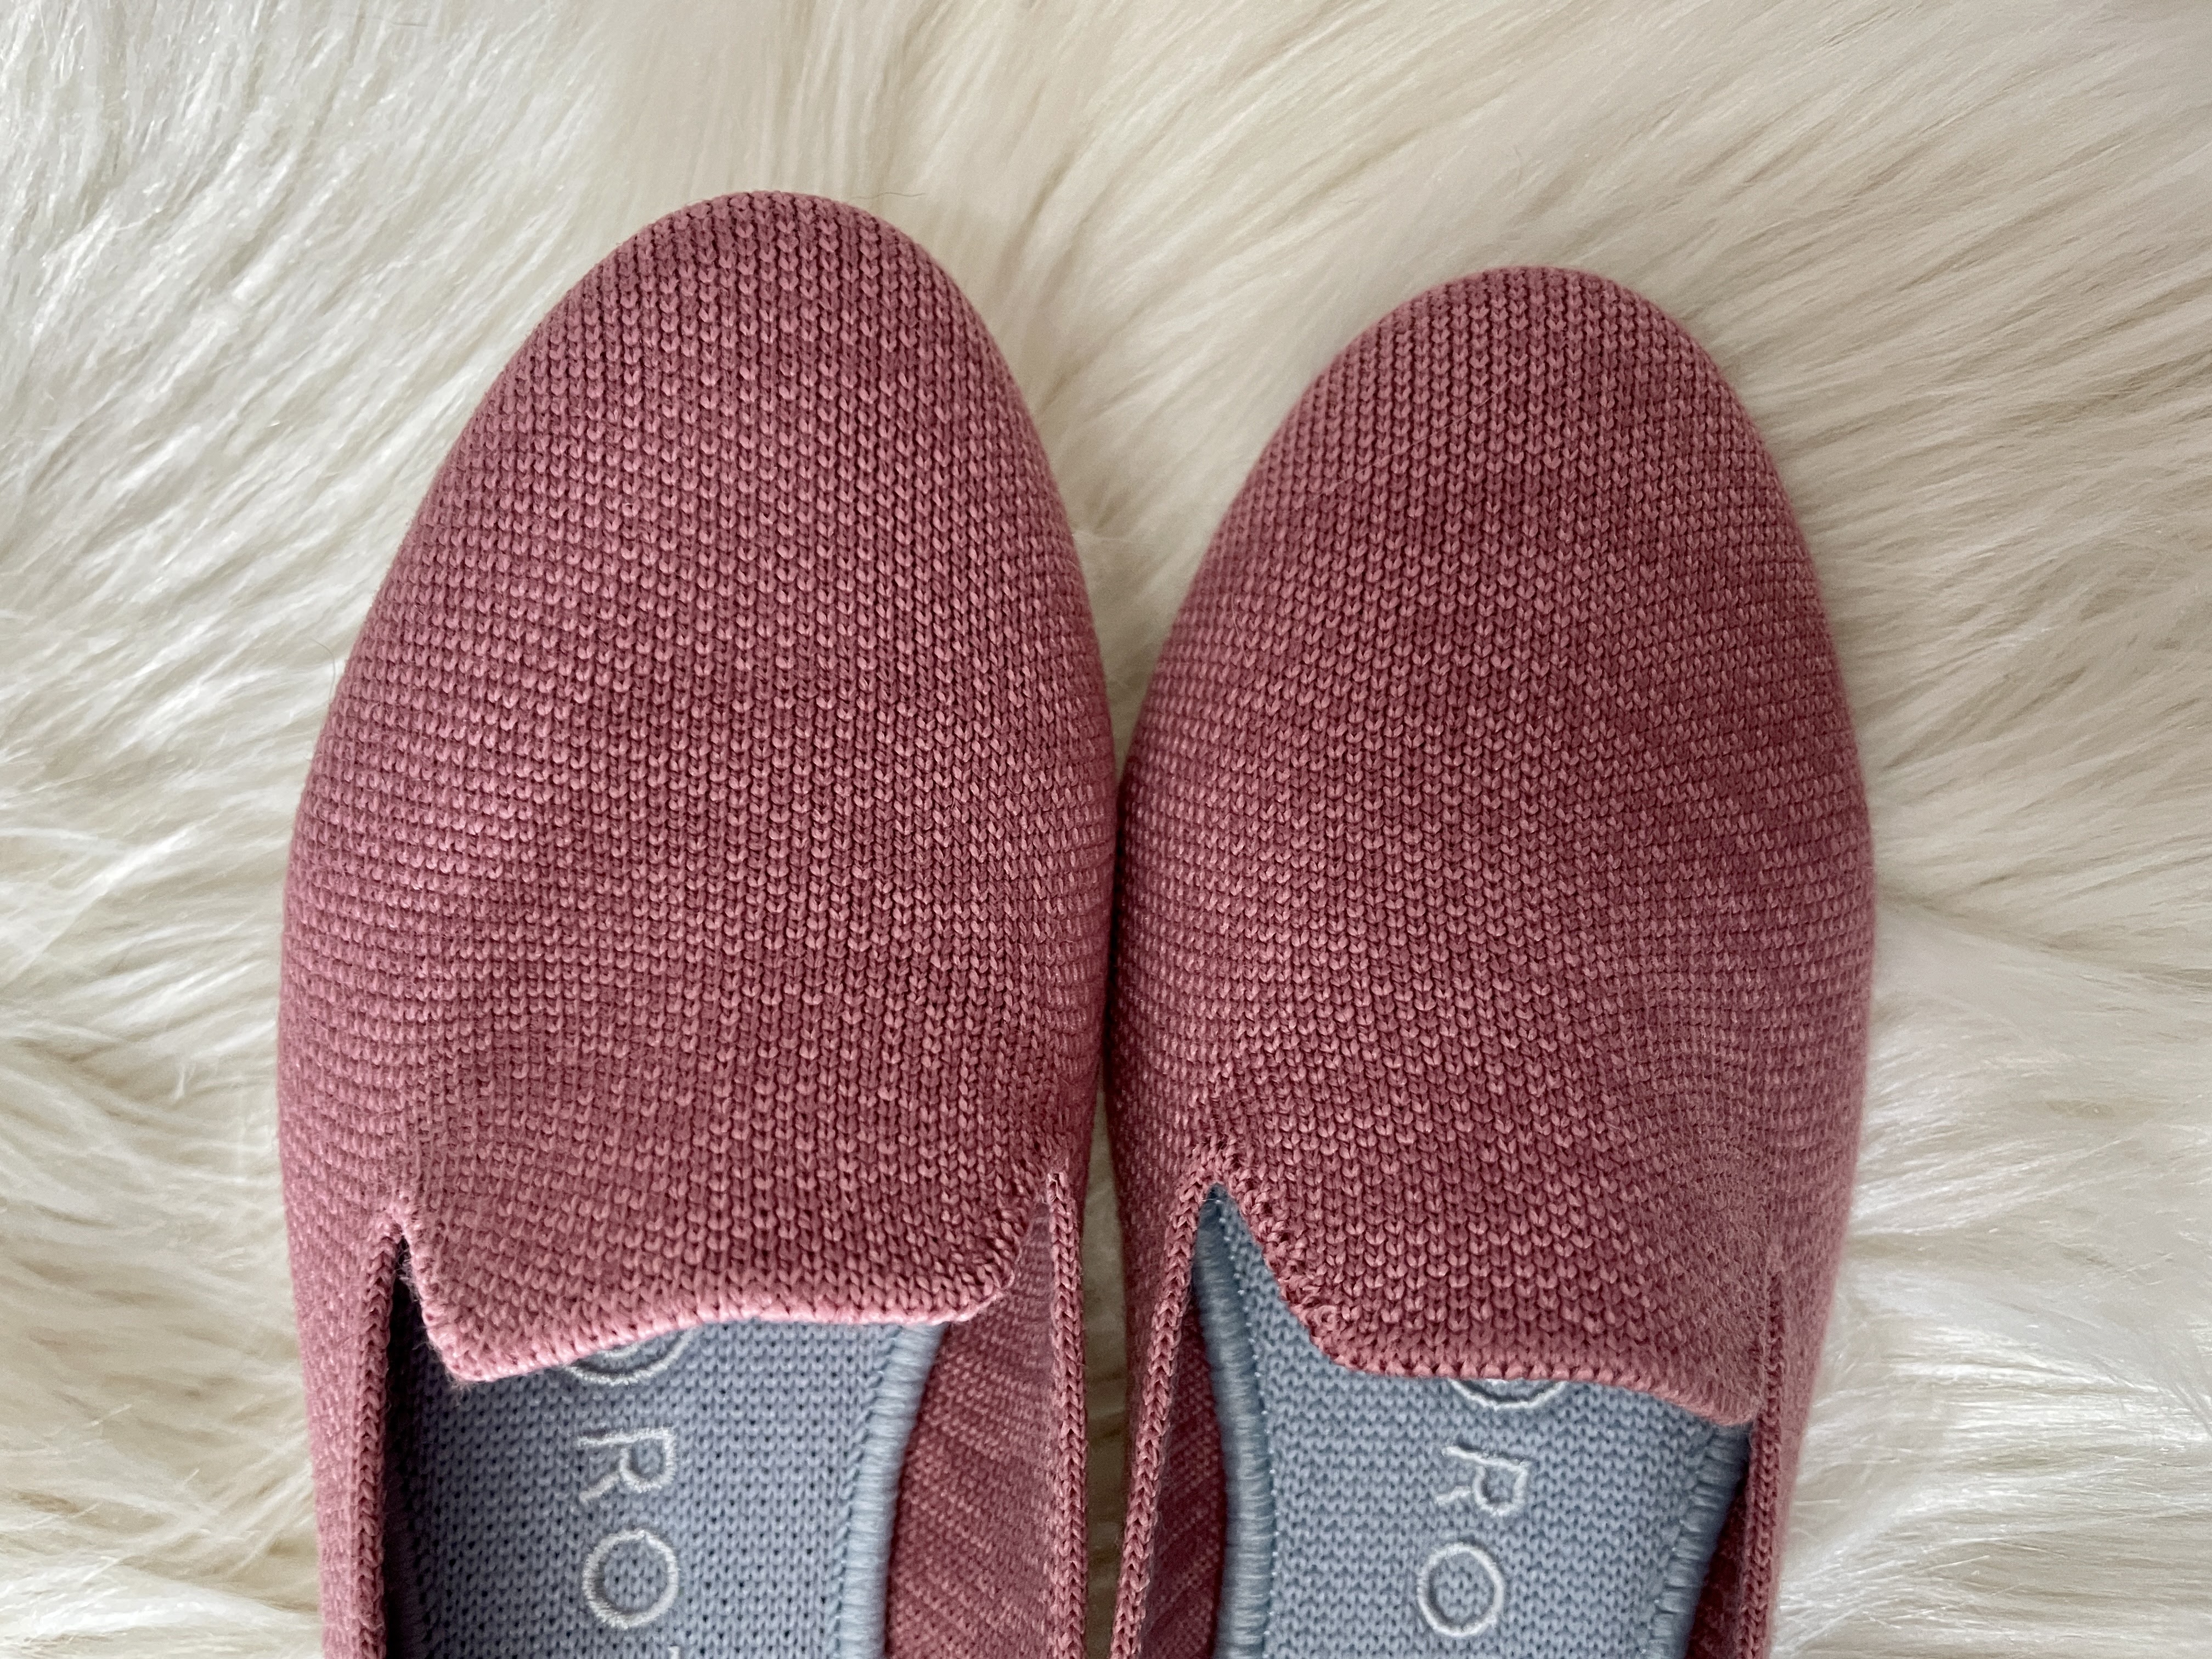 Fit Review Friday! Rothy's Merino Wool Loafer & The Belt Bag